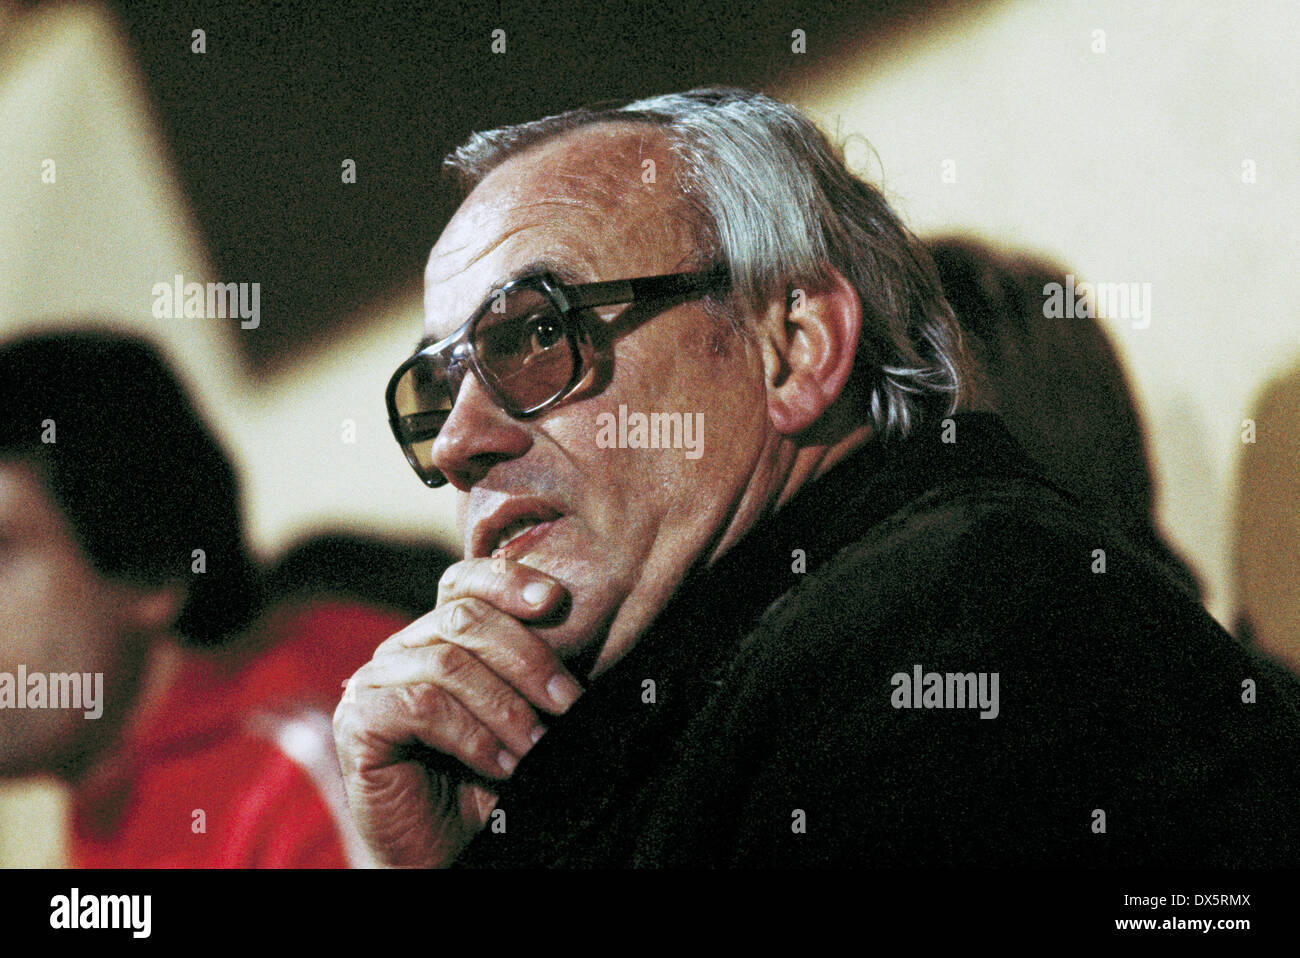 football, Bundesliga, 1976/1977, Stadium an der Castroper Strasse, VfL Bochum versus 1. FC Cologne 1:2, coach Hennes Weisweiler (FC) wearing glasses sit on the coaching bench, sceptical Stock Photo